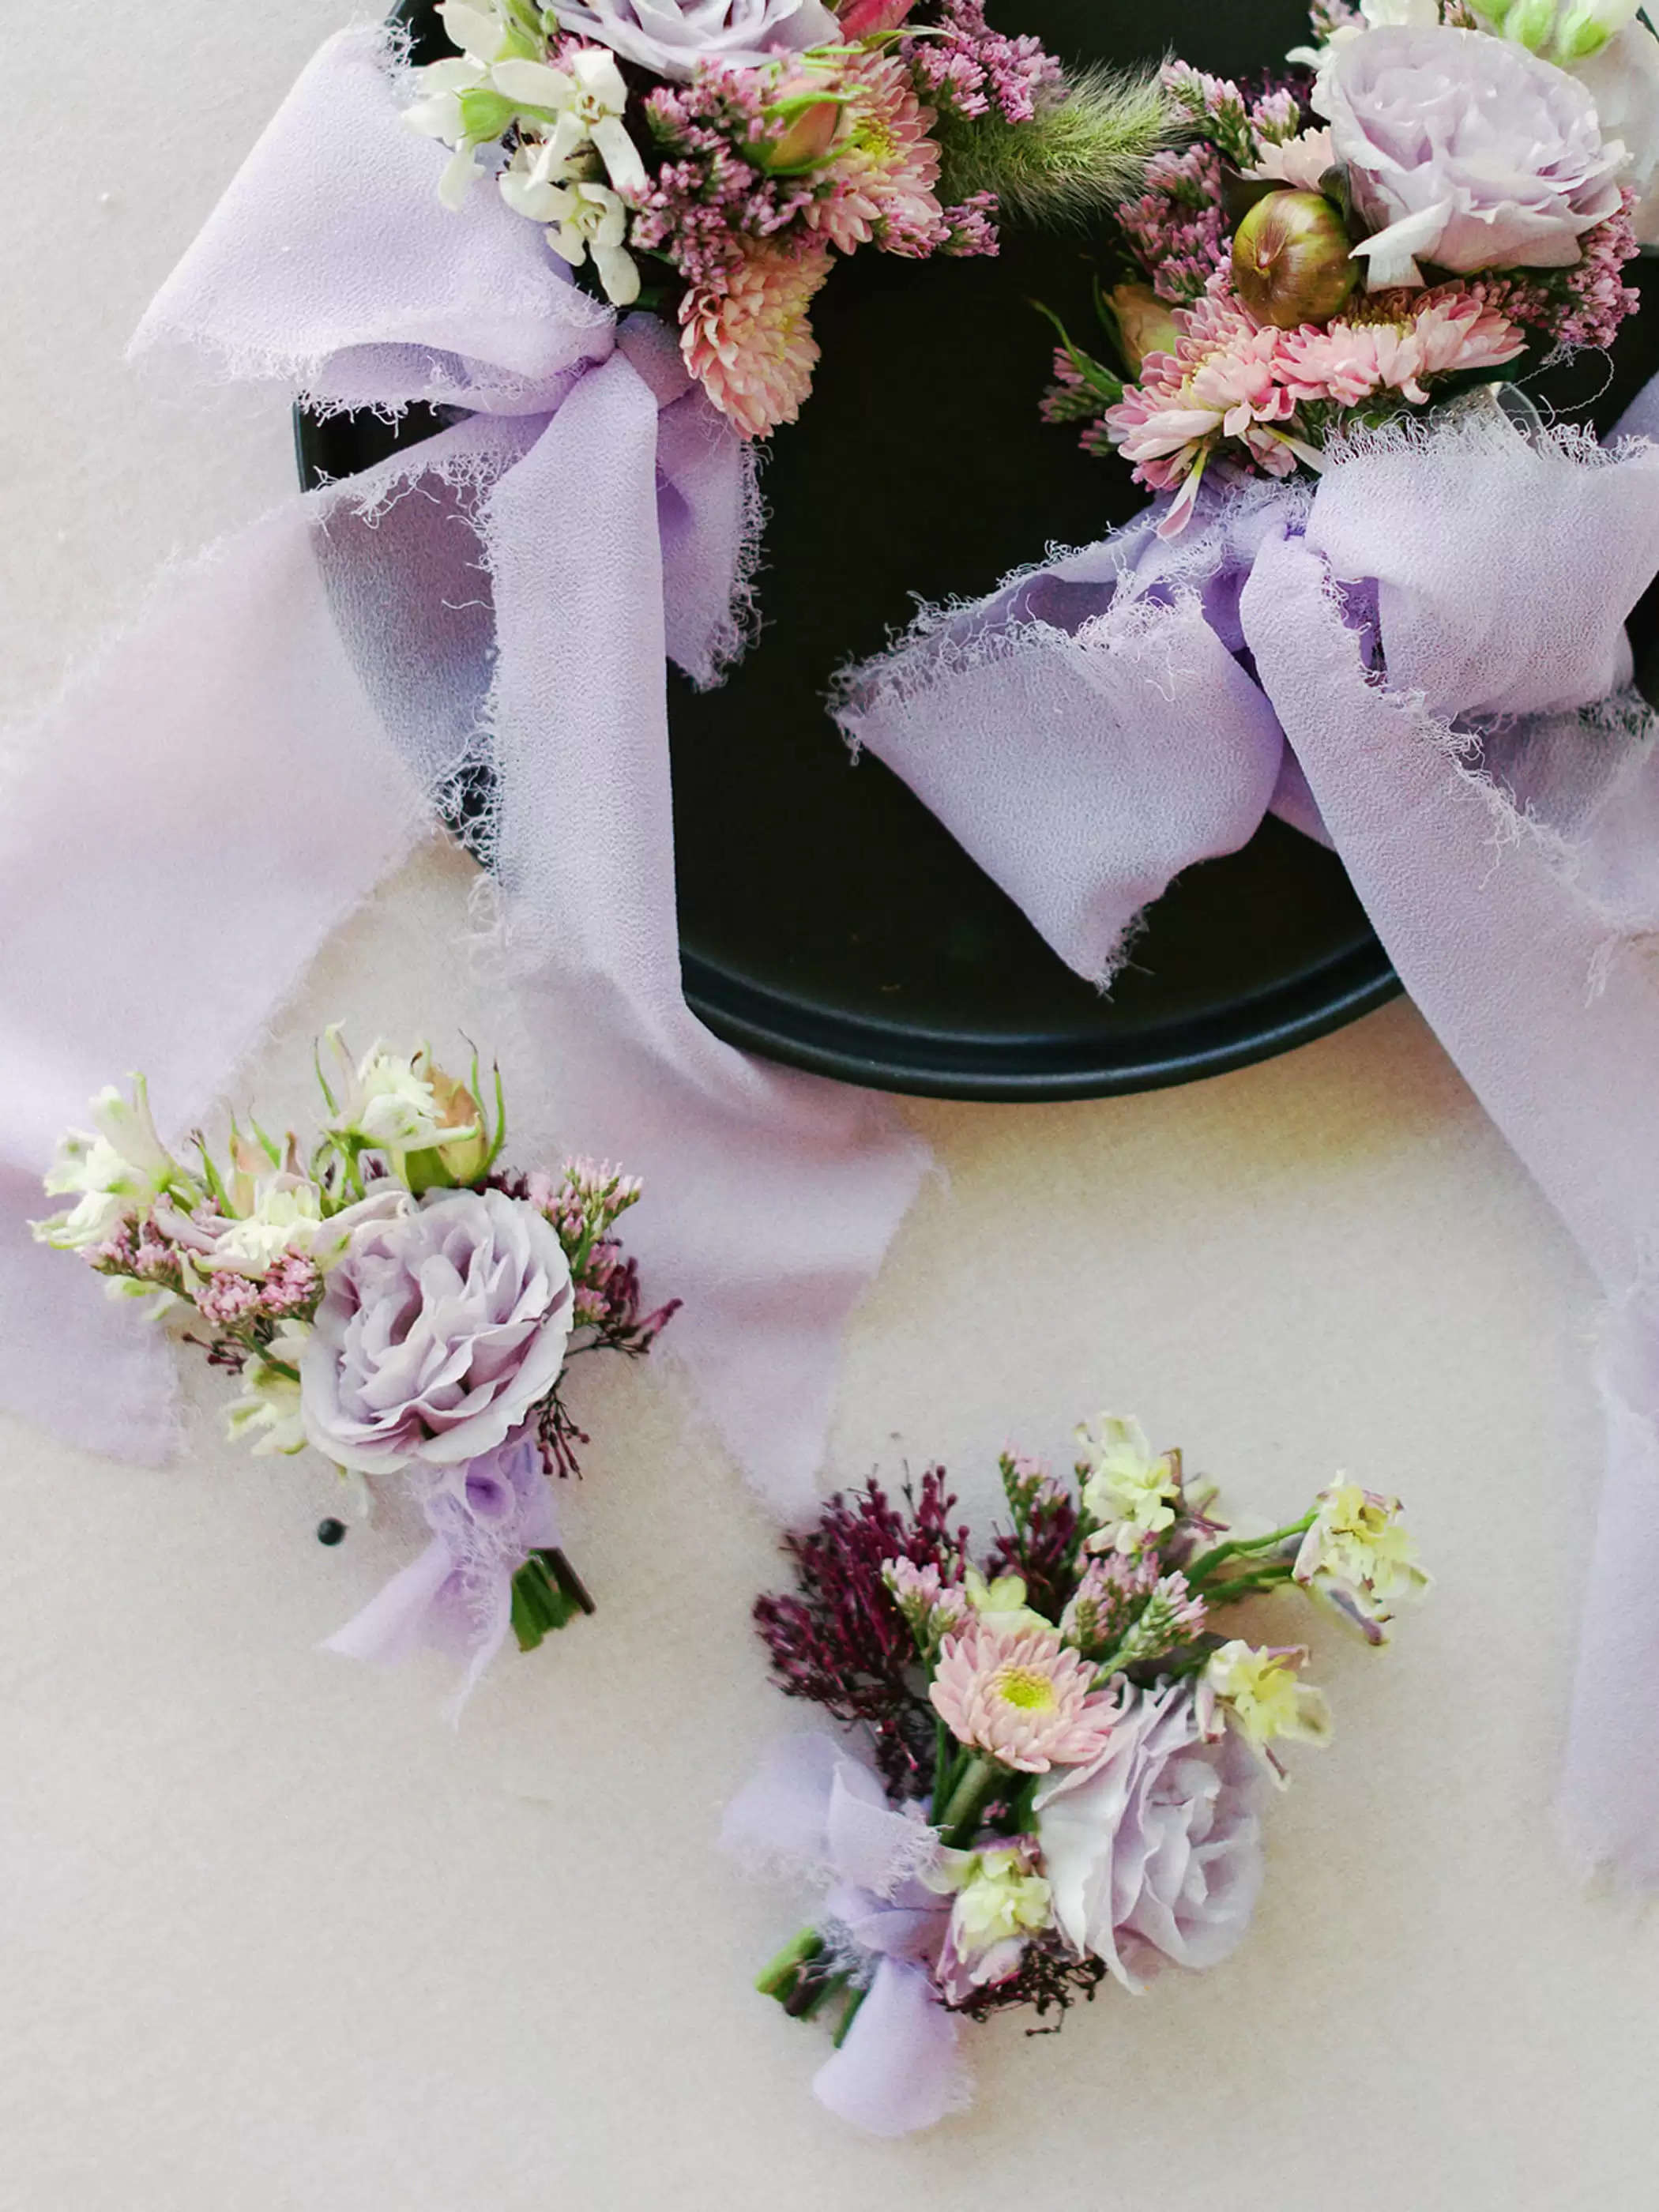 The Groom Wore a Purple Swimsuit for this Stylish + Whimsical Wine Nation Wedding ceremony